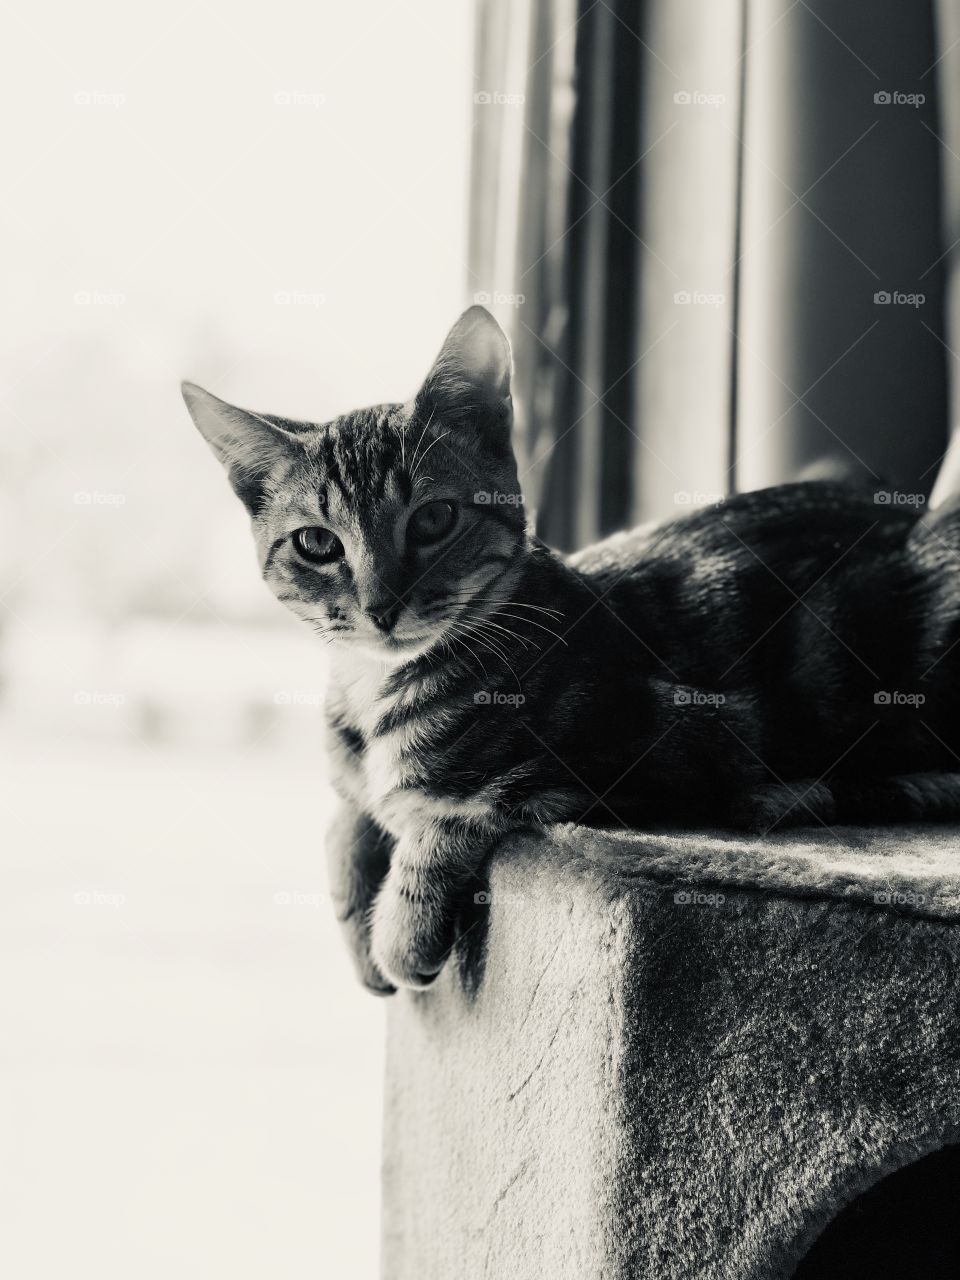 Young kitten portrayed in black and white curiously looking at the lens of the camera 